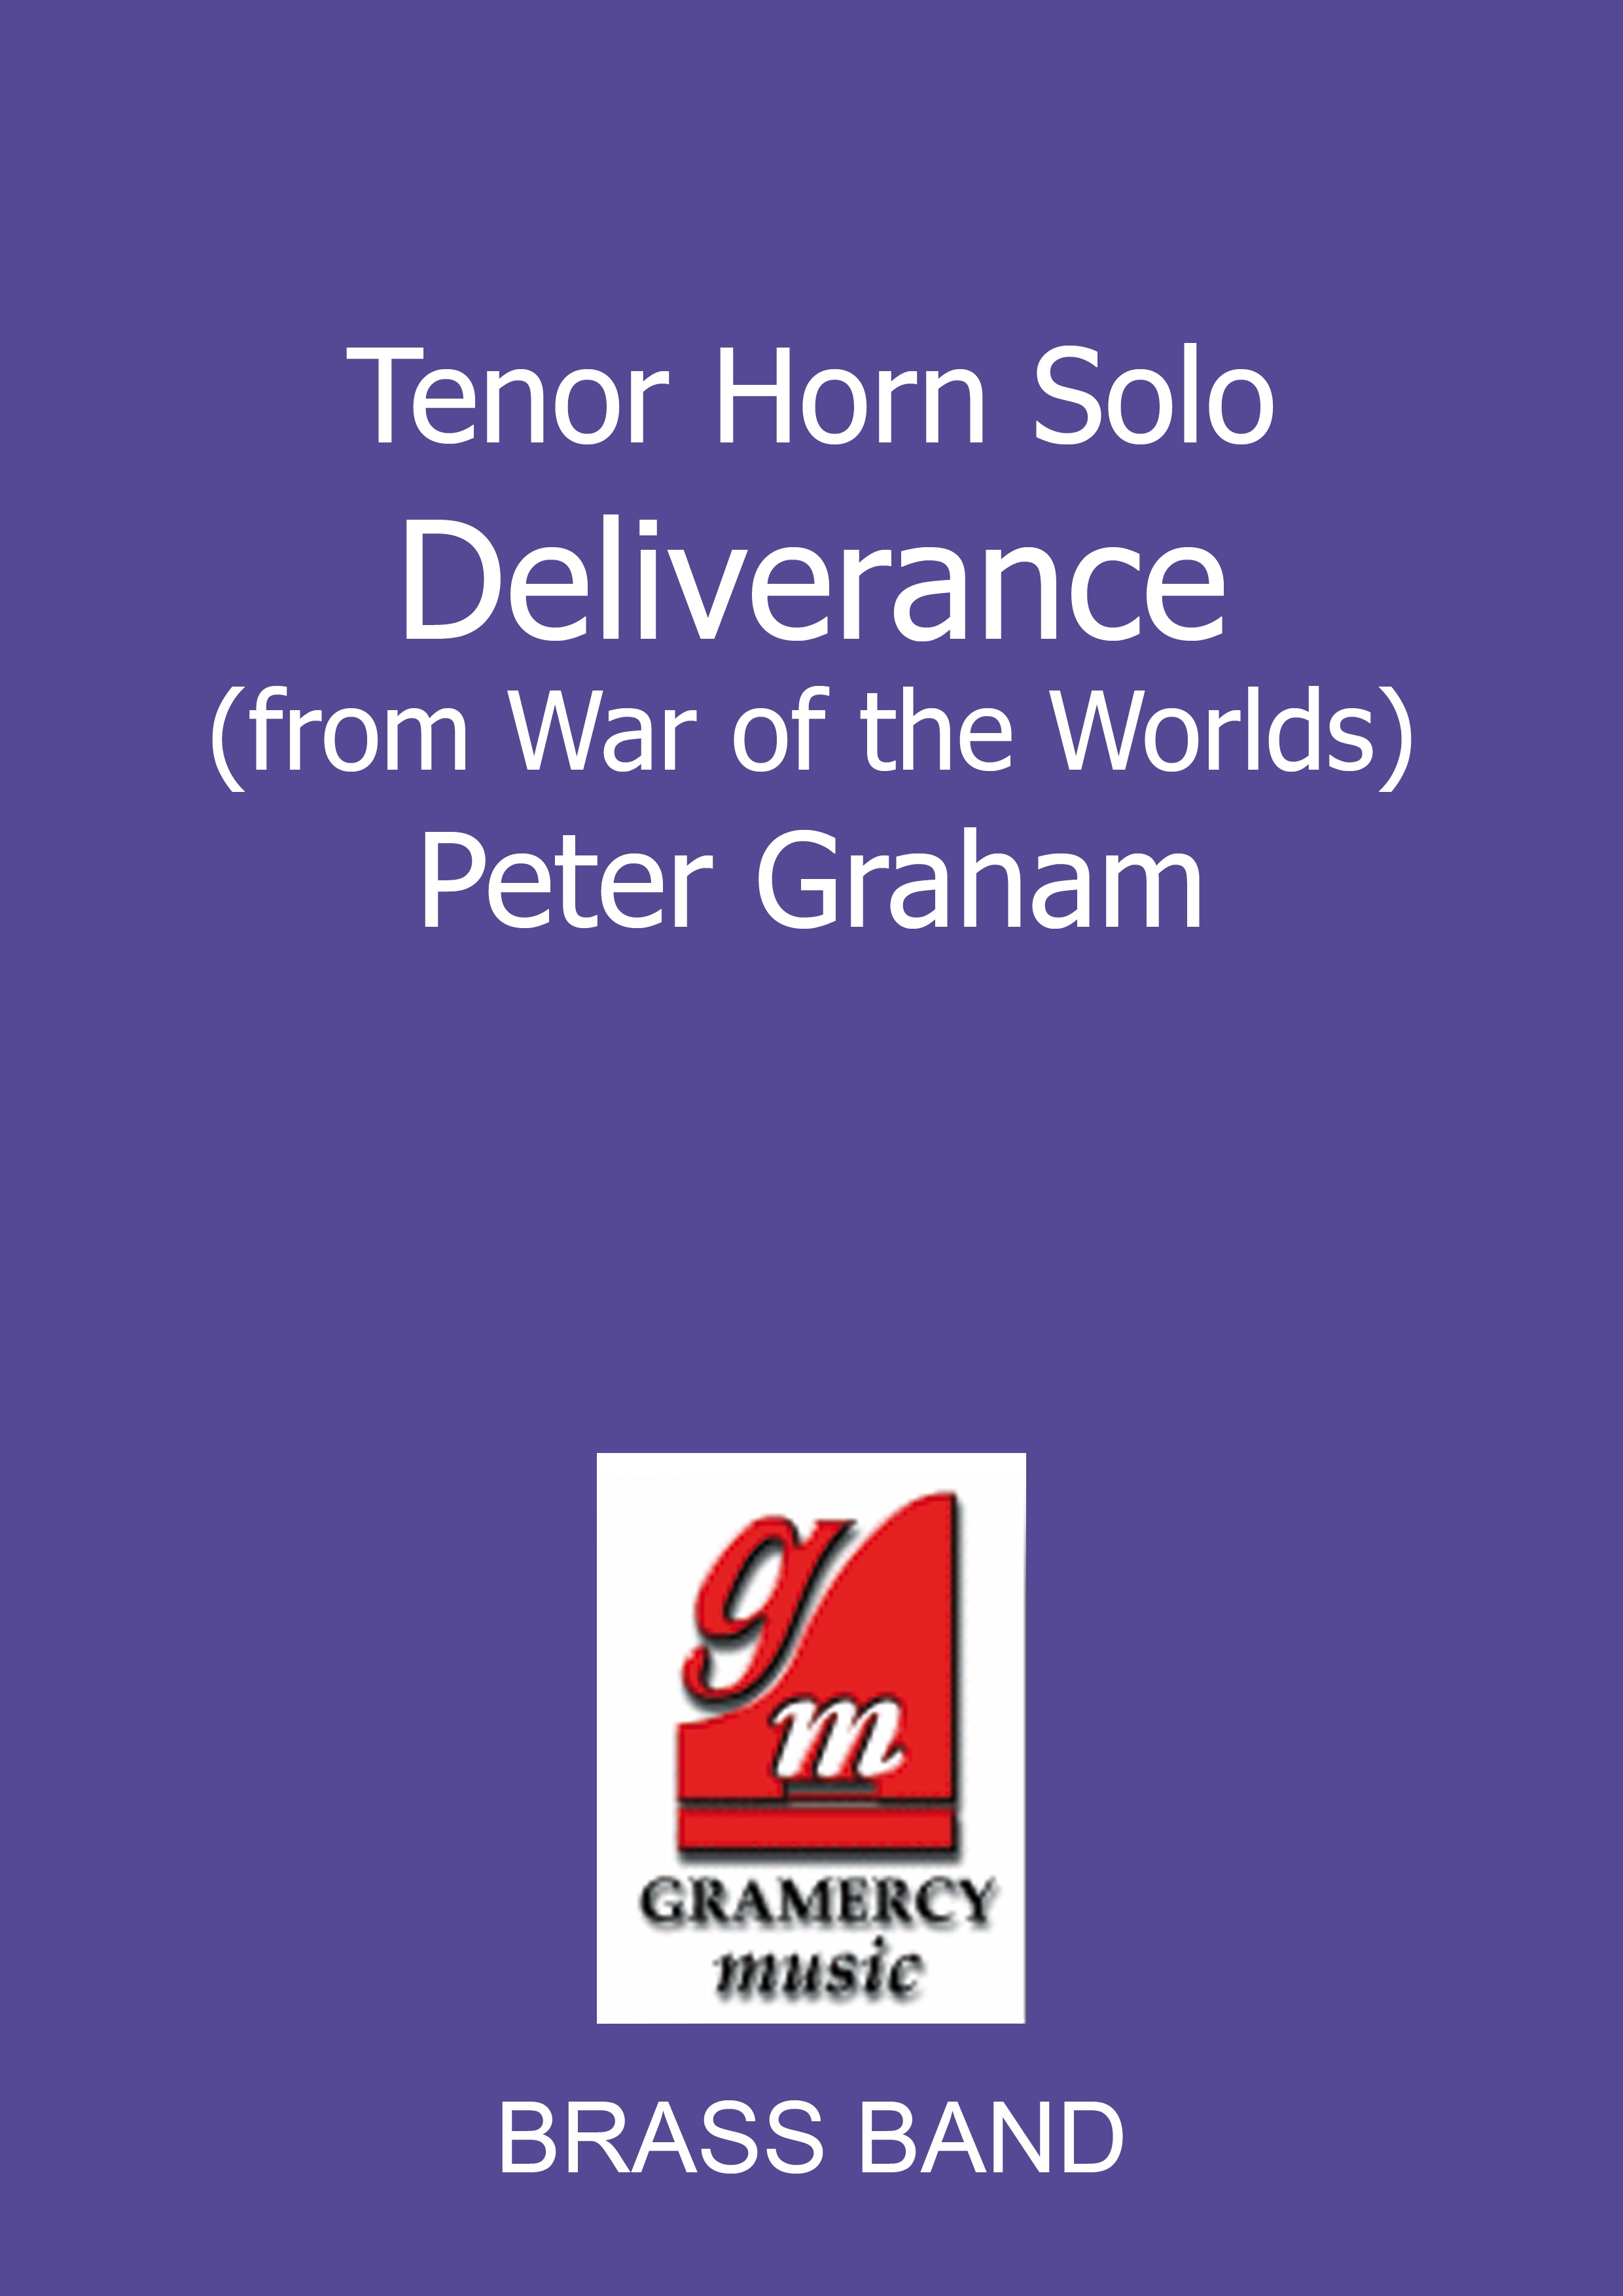 Deliverance (from War of the Worlds Suite) (Soprano Cornet or Tenor Horn Solo with Brass Band)